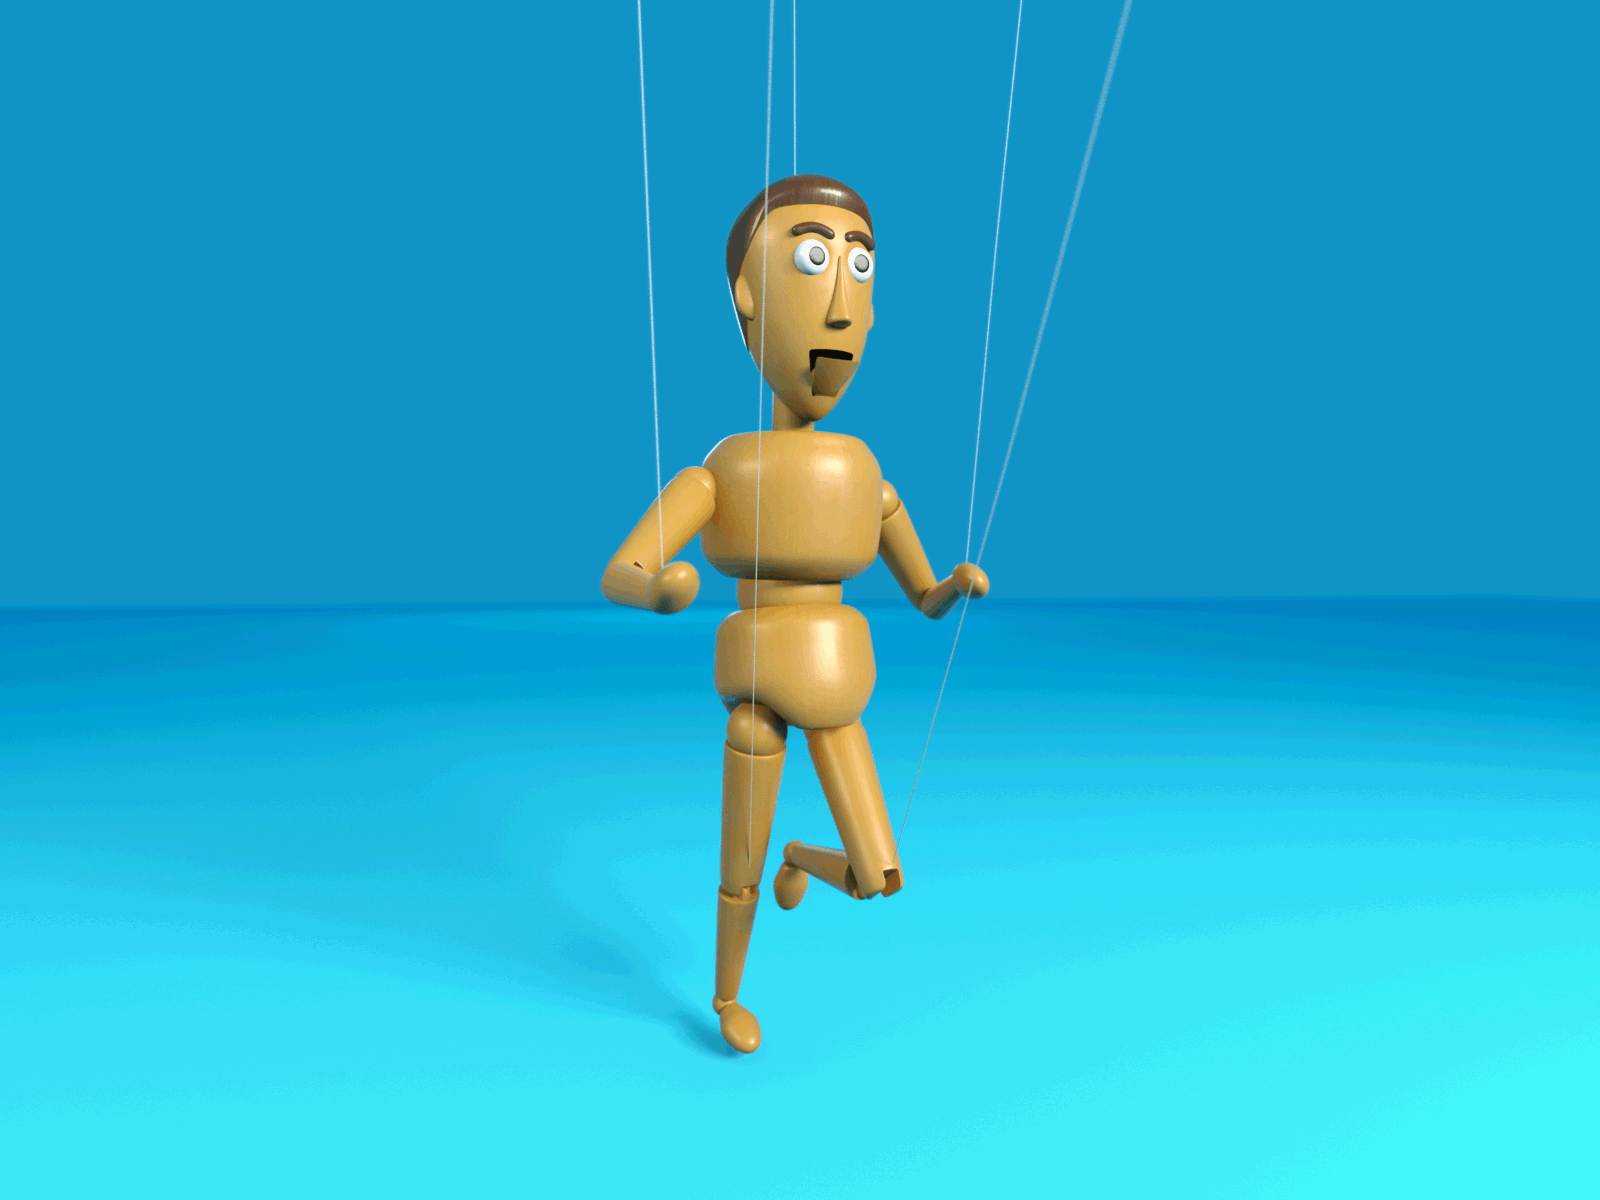 puppet rig 3d after effects animation c4d character dance fun graphics motion design personal project